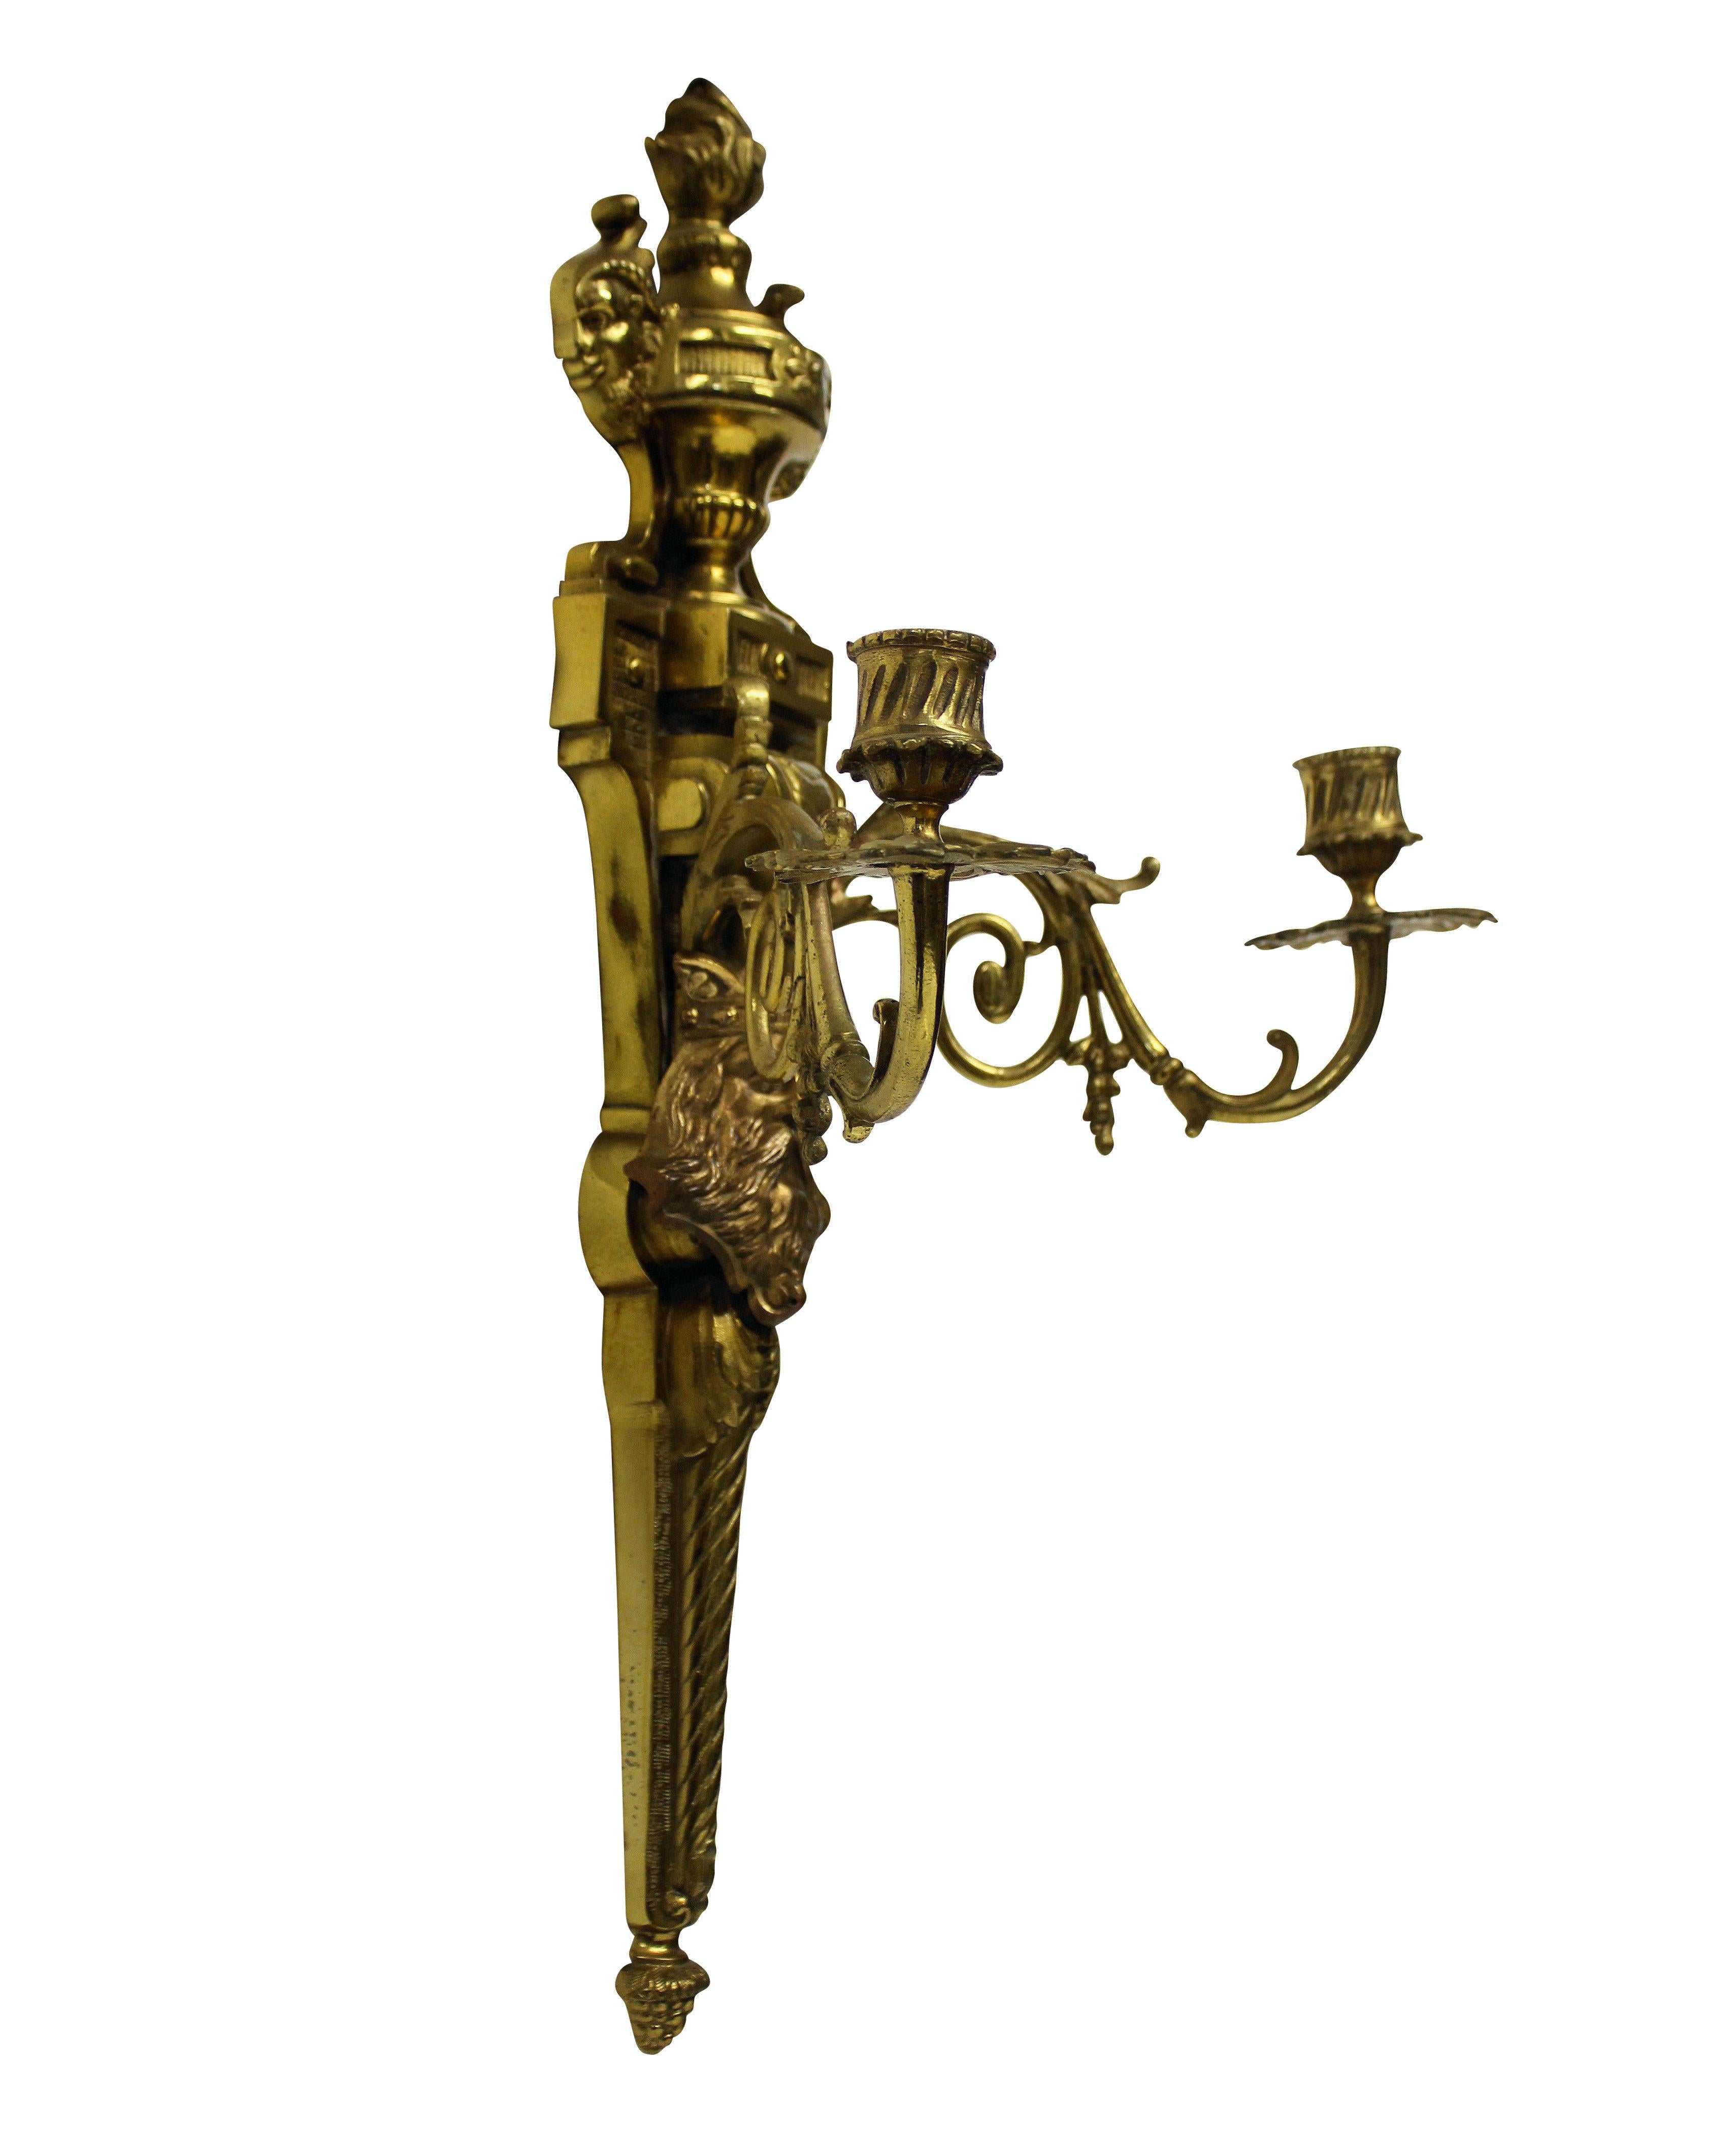 English Pair of Gilt Bronze Wall Sconces Depicting Kings